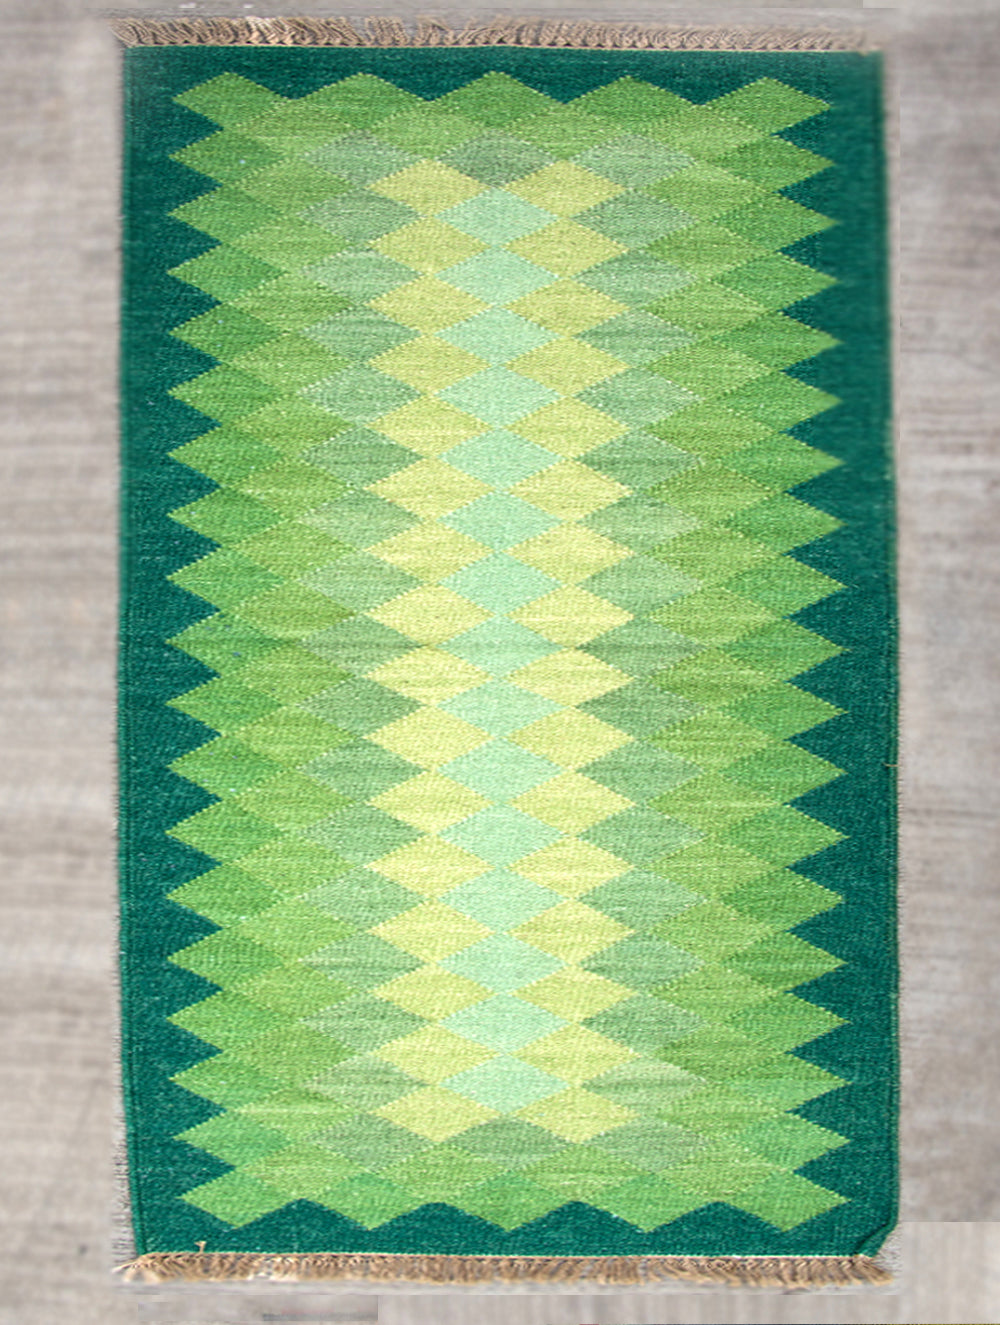 Load image into Gallery viewer, Handwoven Kilim Rug (5 x 3 ft) - Zigzags - The India Craft House 